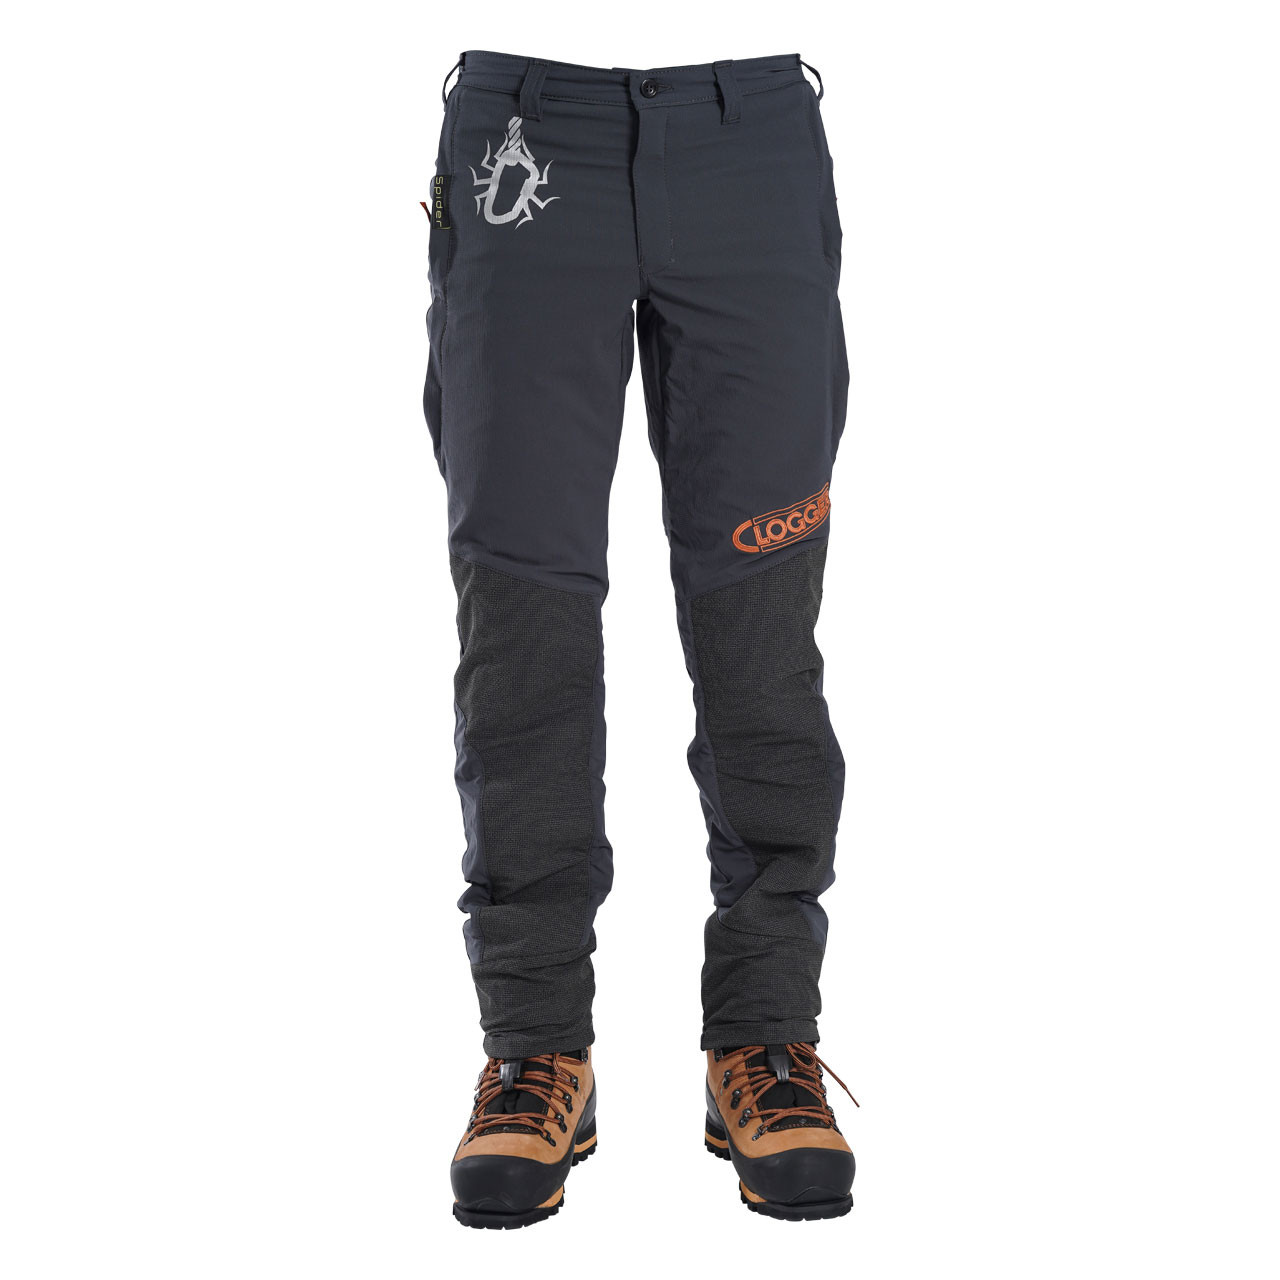 Clogger Spider Men's Climbing and Work Pants